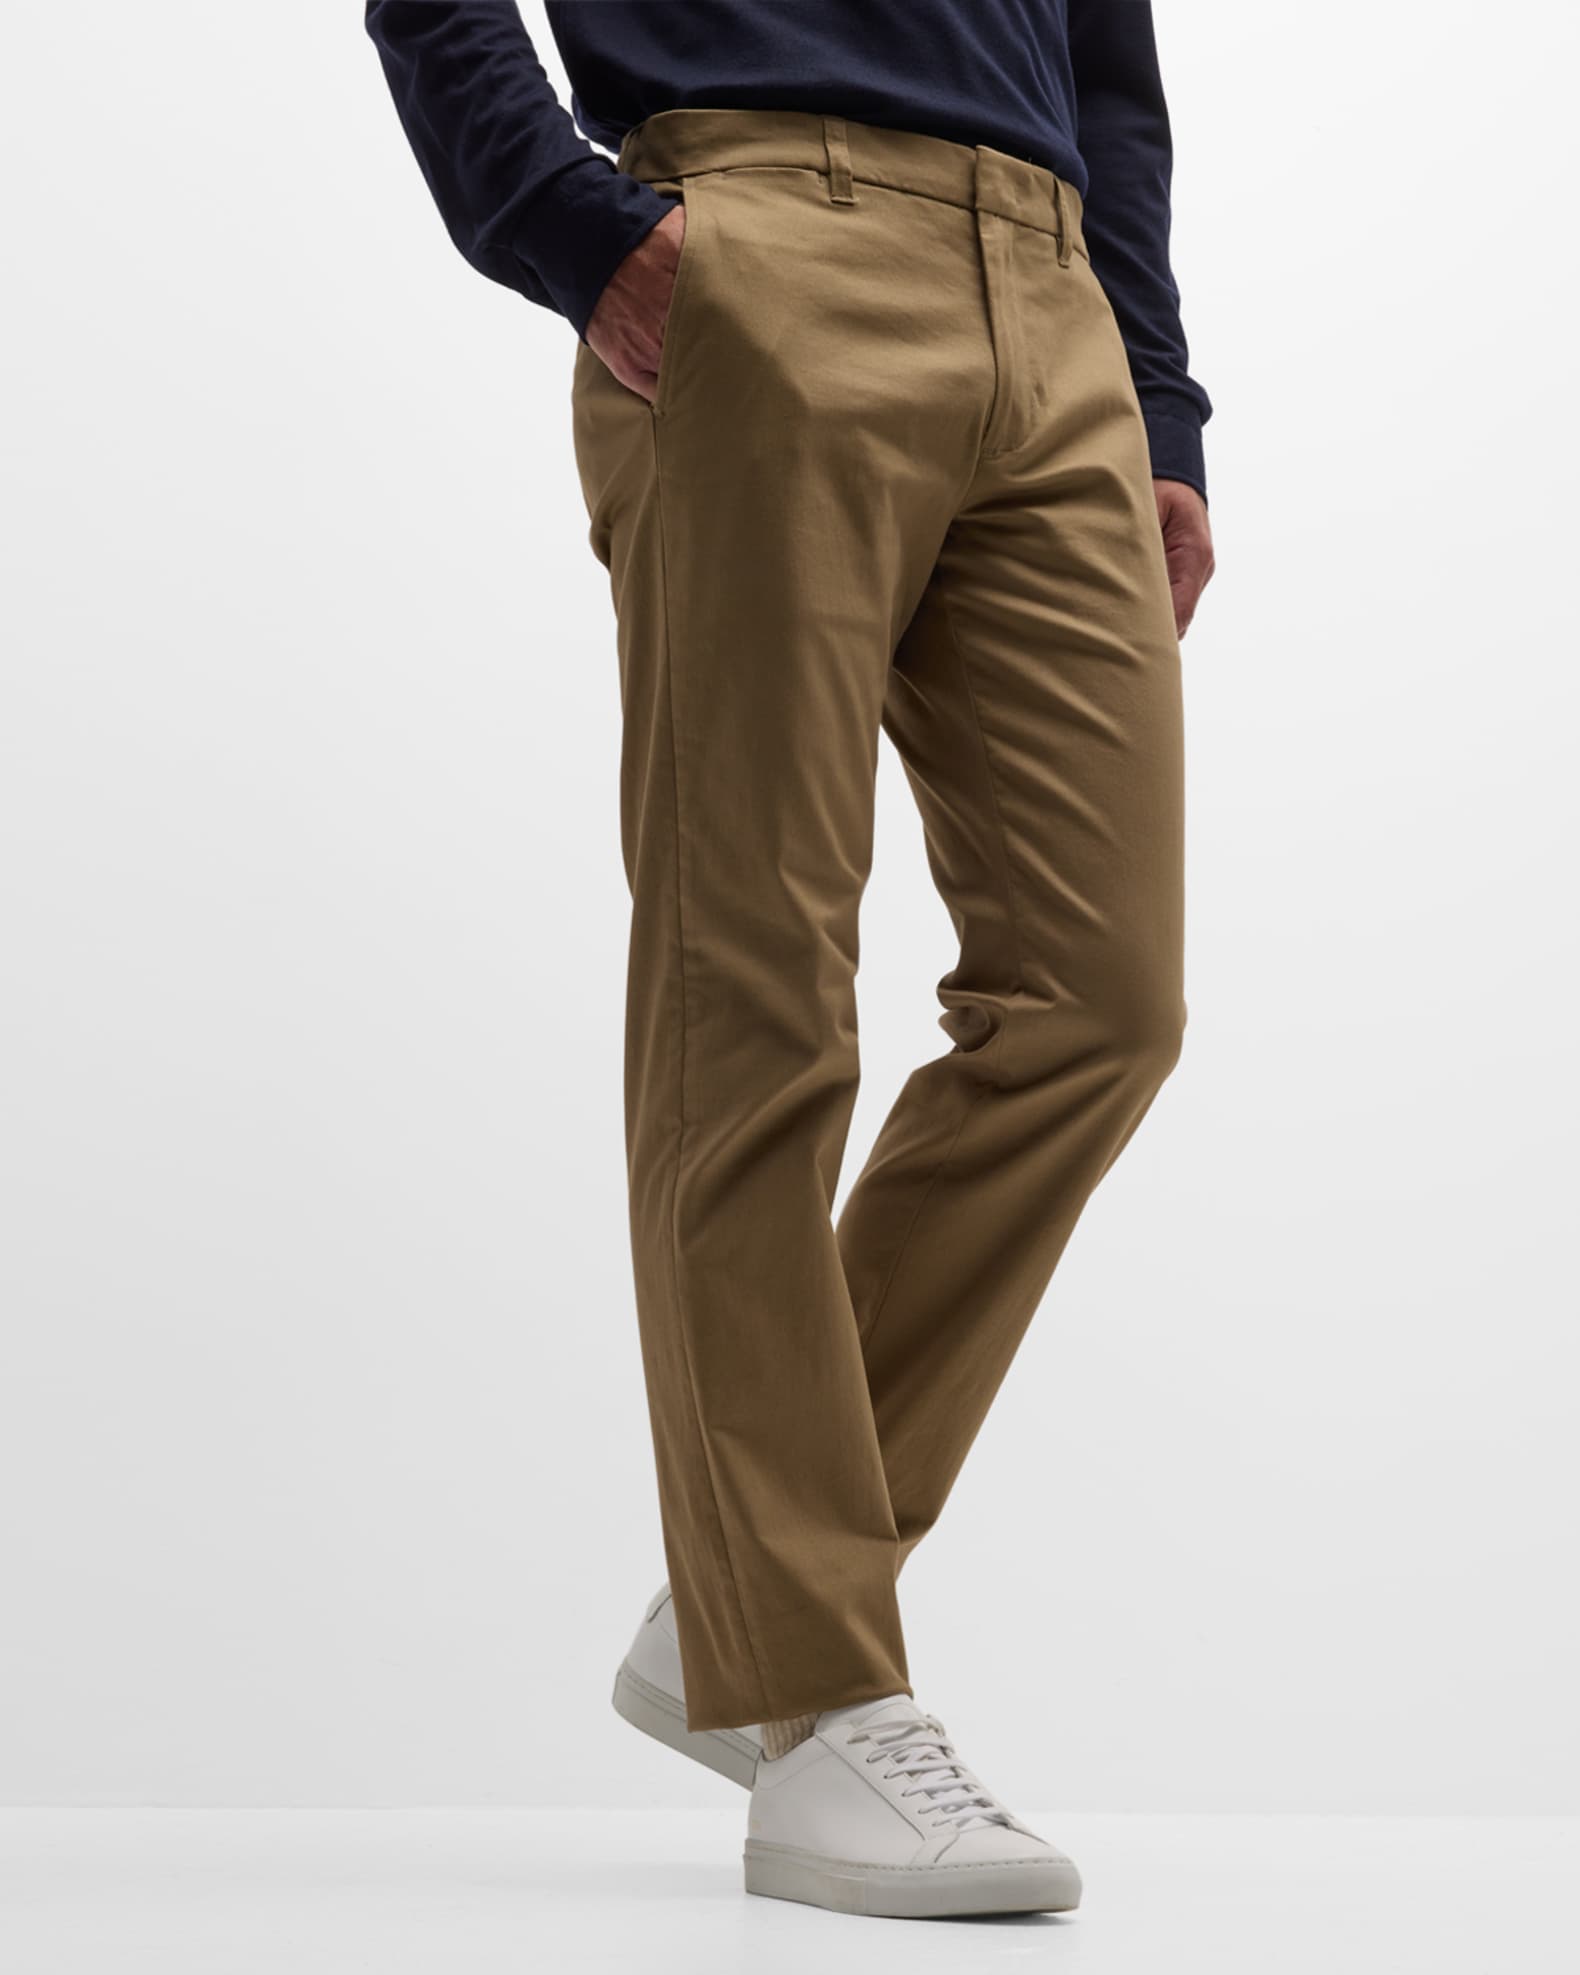 Vince Men's Griffith Twill Chino Pants | Neiman Marcus